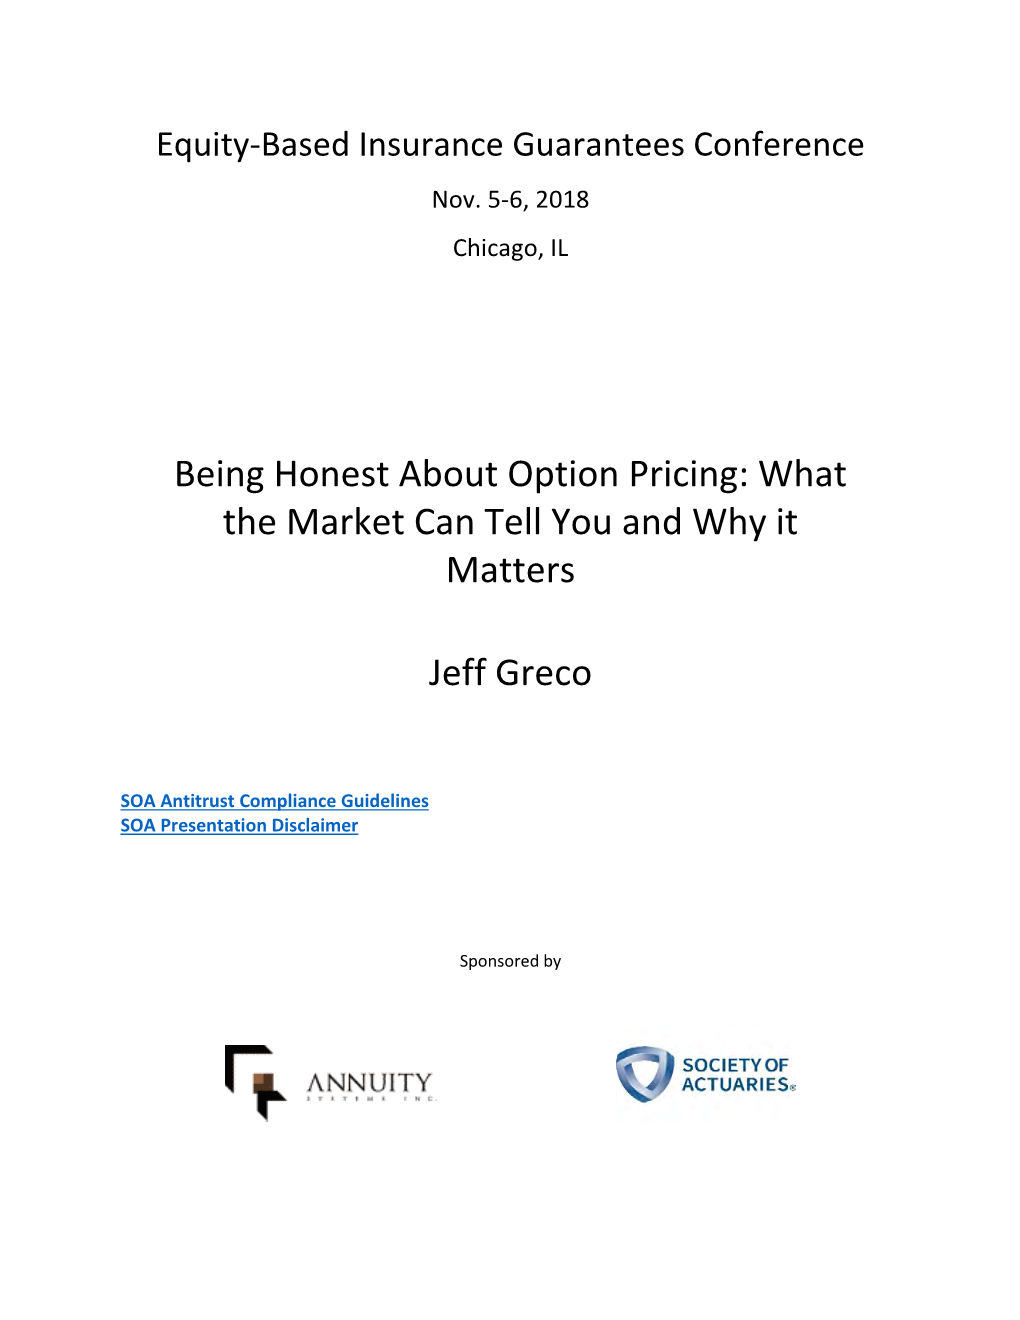 Being Honest About Option Pricing: What the Market Can Tell You and Why It Matters